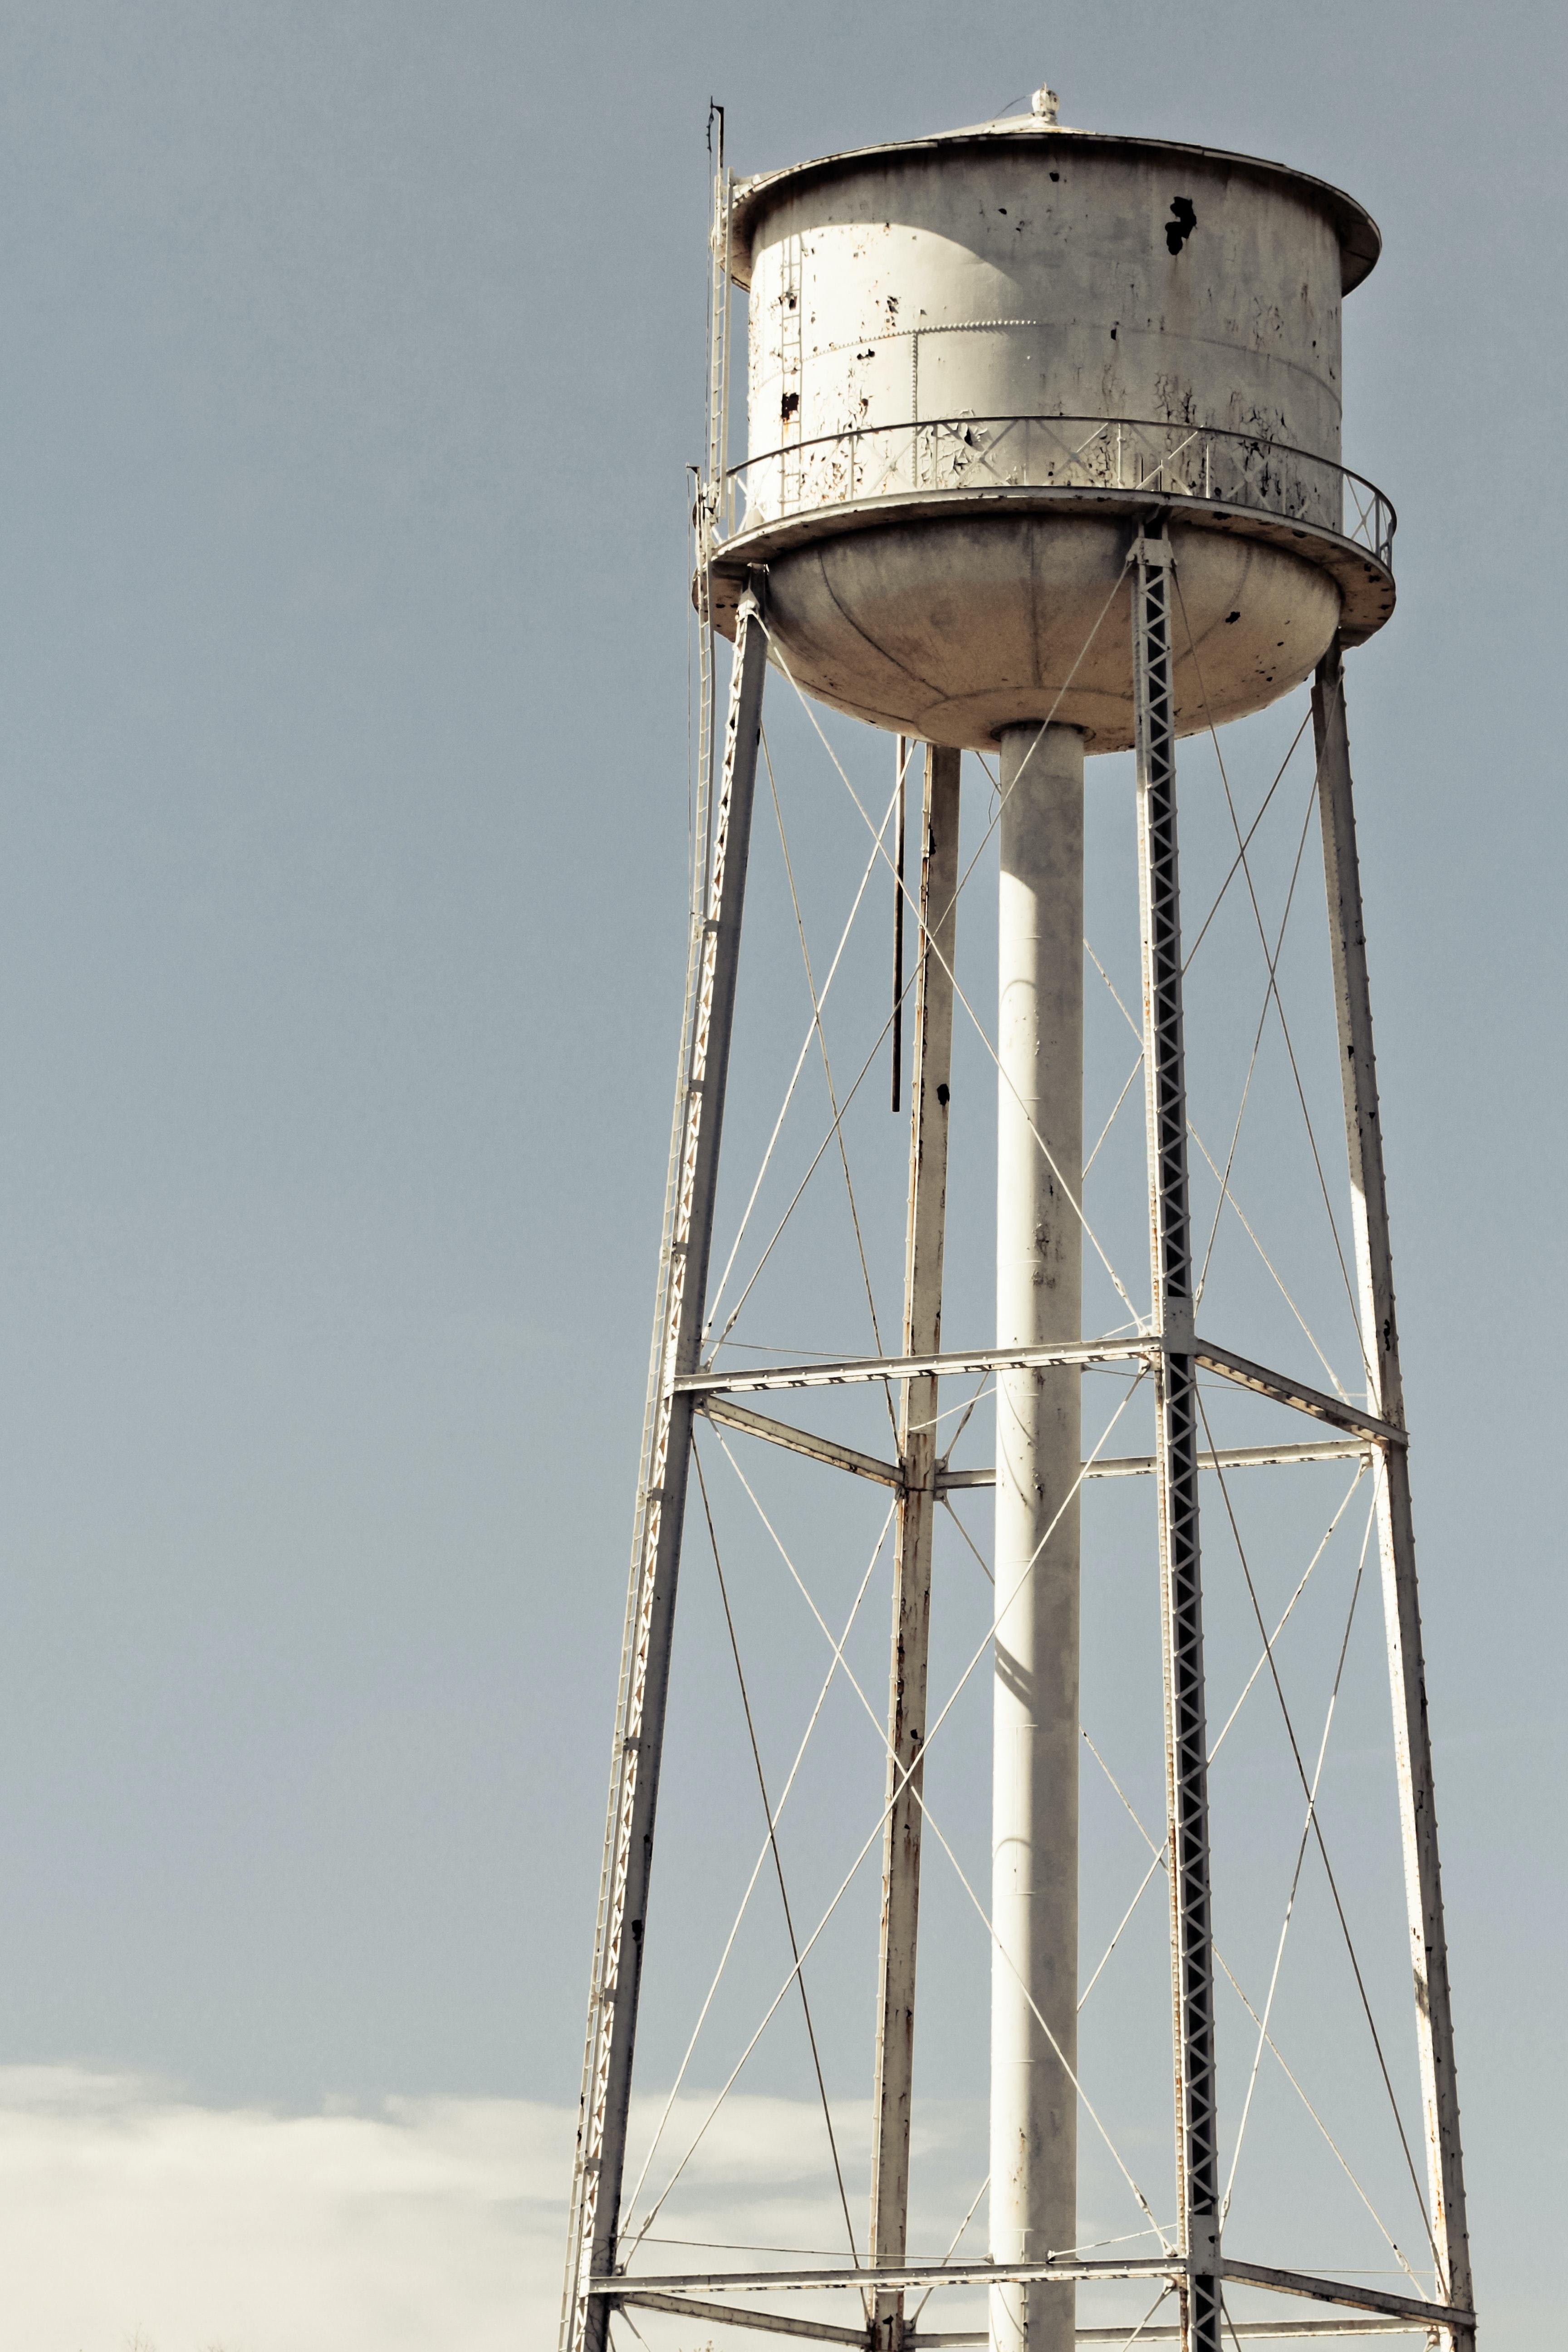  Why Do We Use Water Towers 